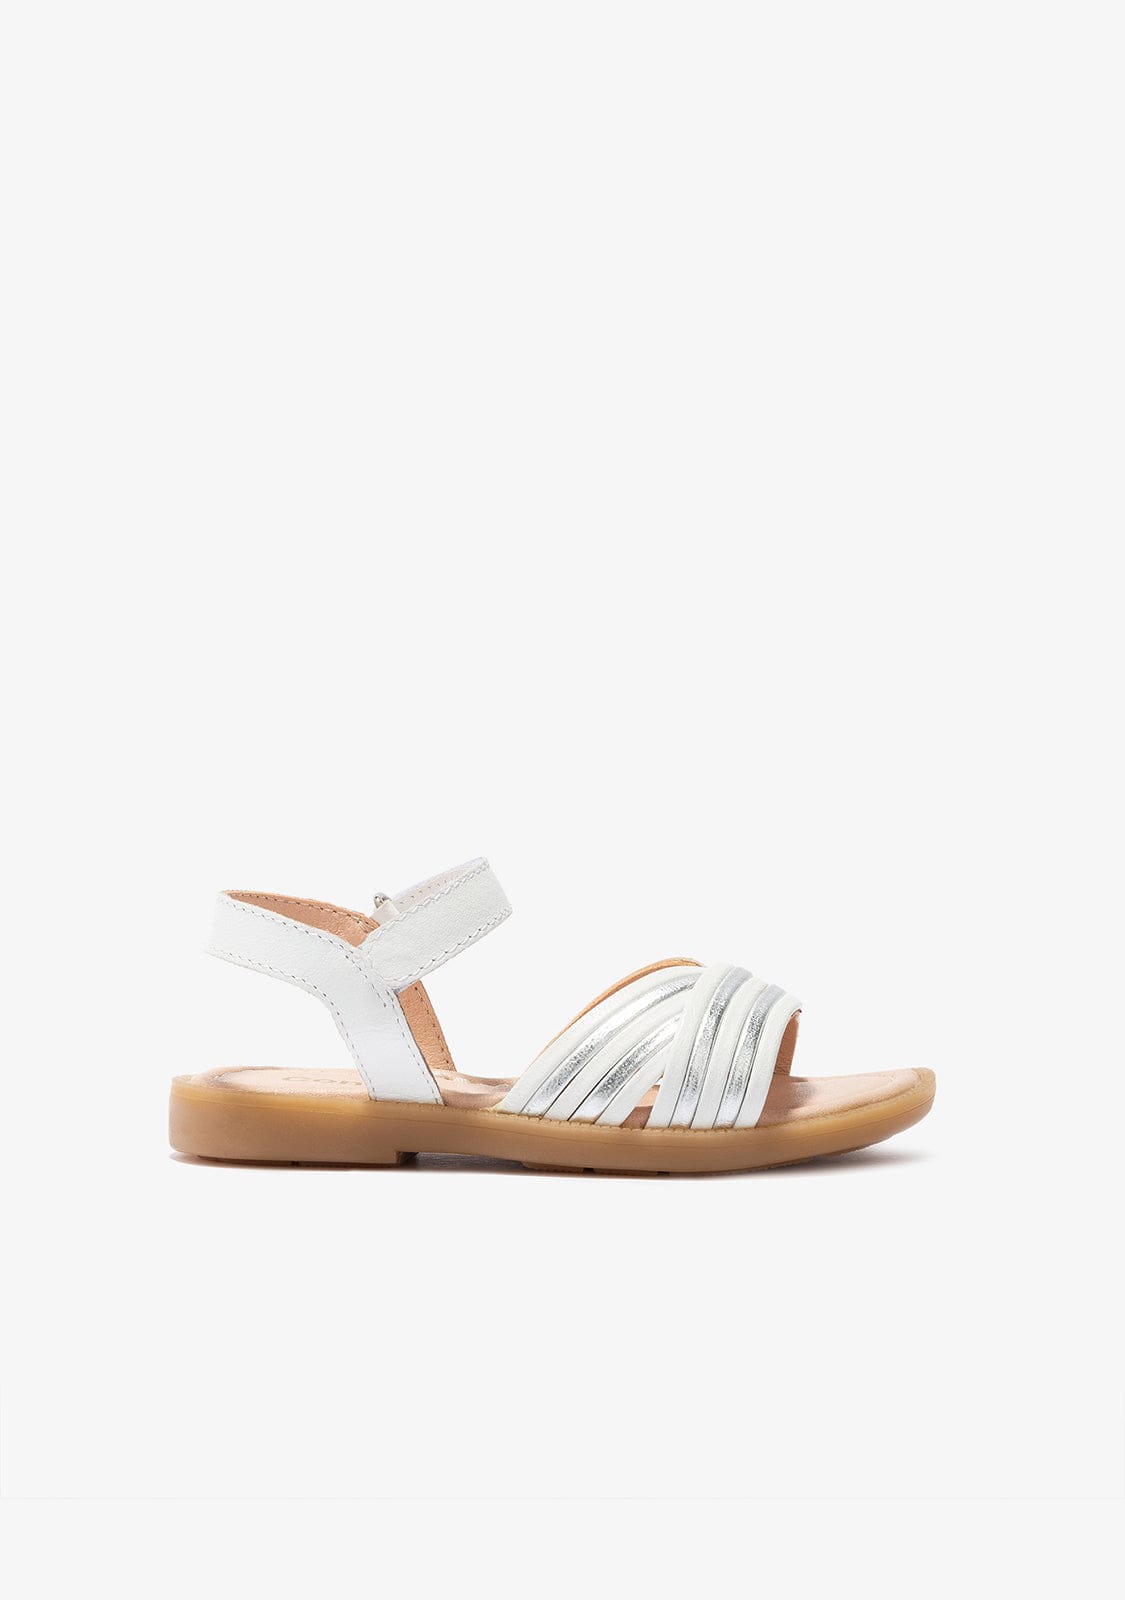 CONGUITOS Shoes Girl's White Straps Leather Sandals